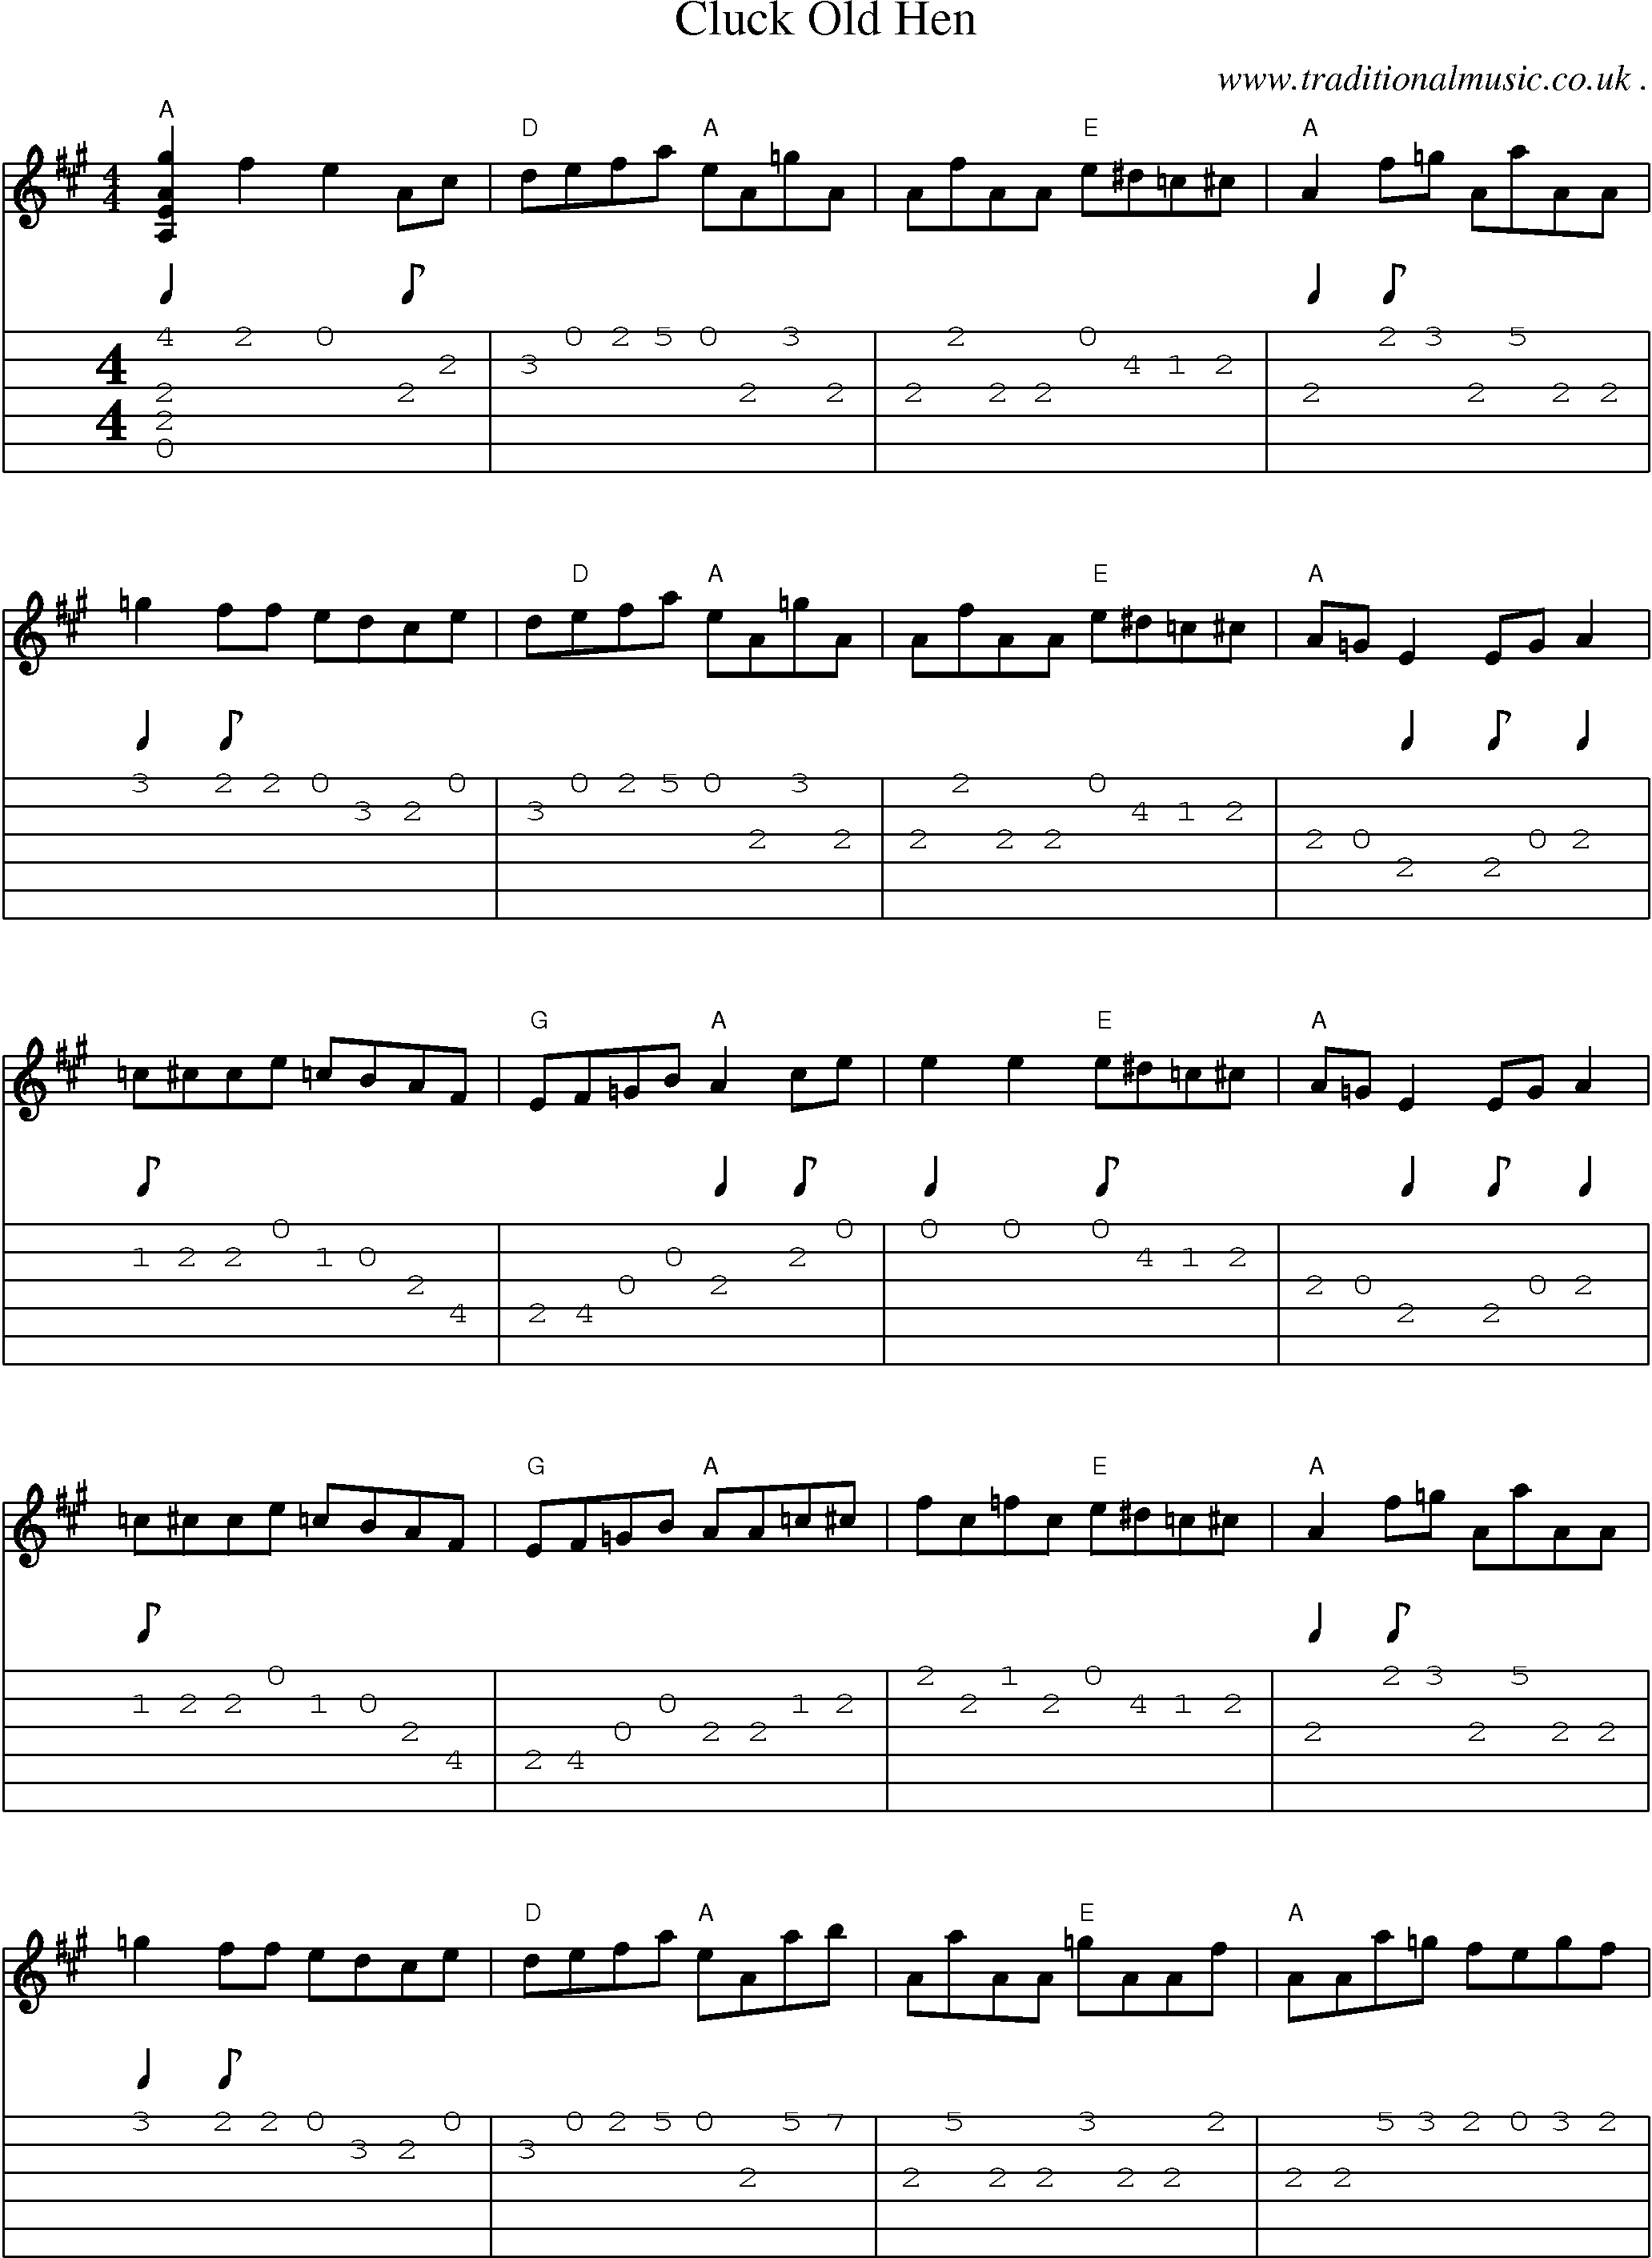 Music Score and Guitar Tabs for Cluck Old Hen